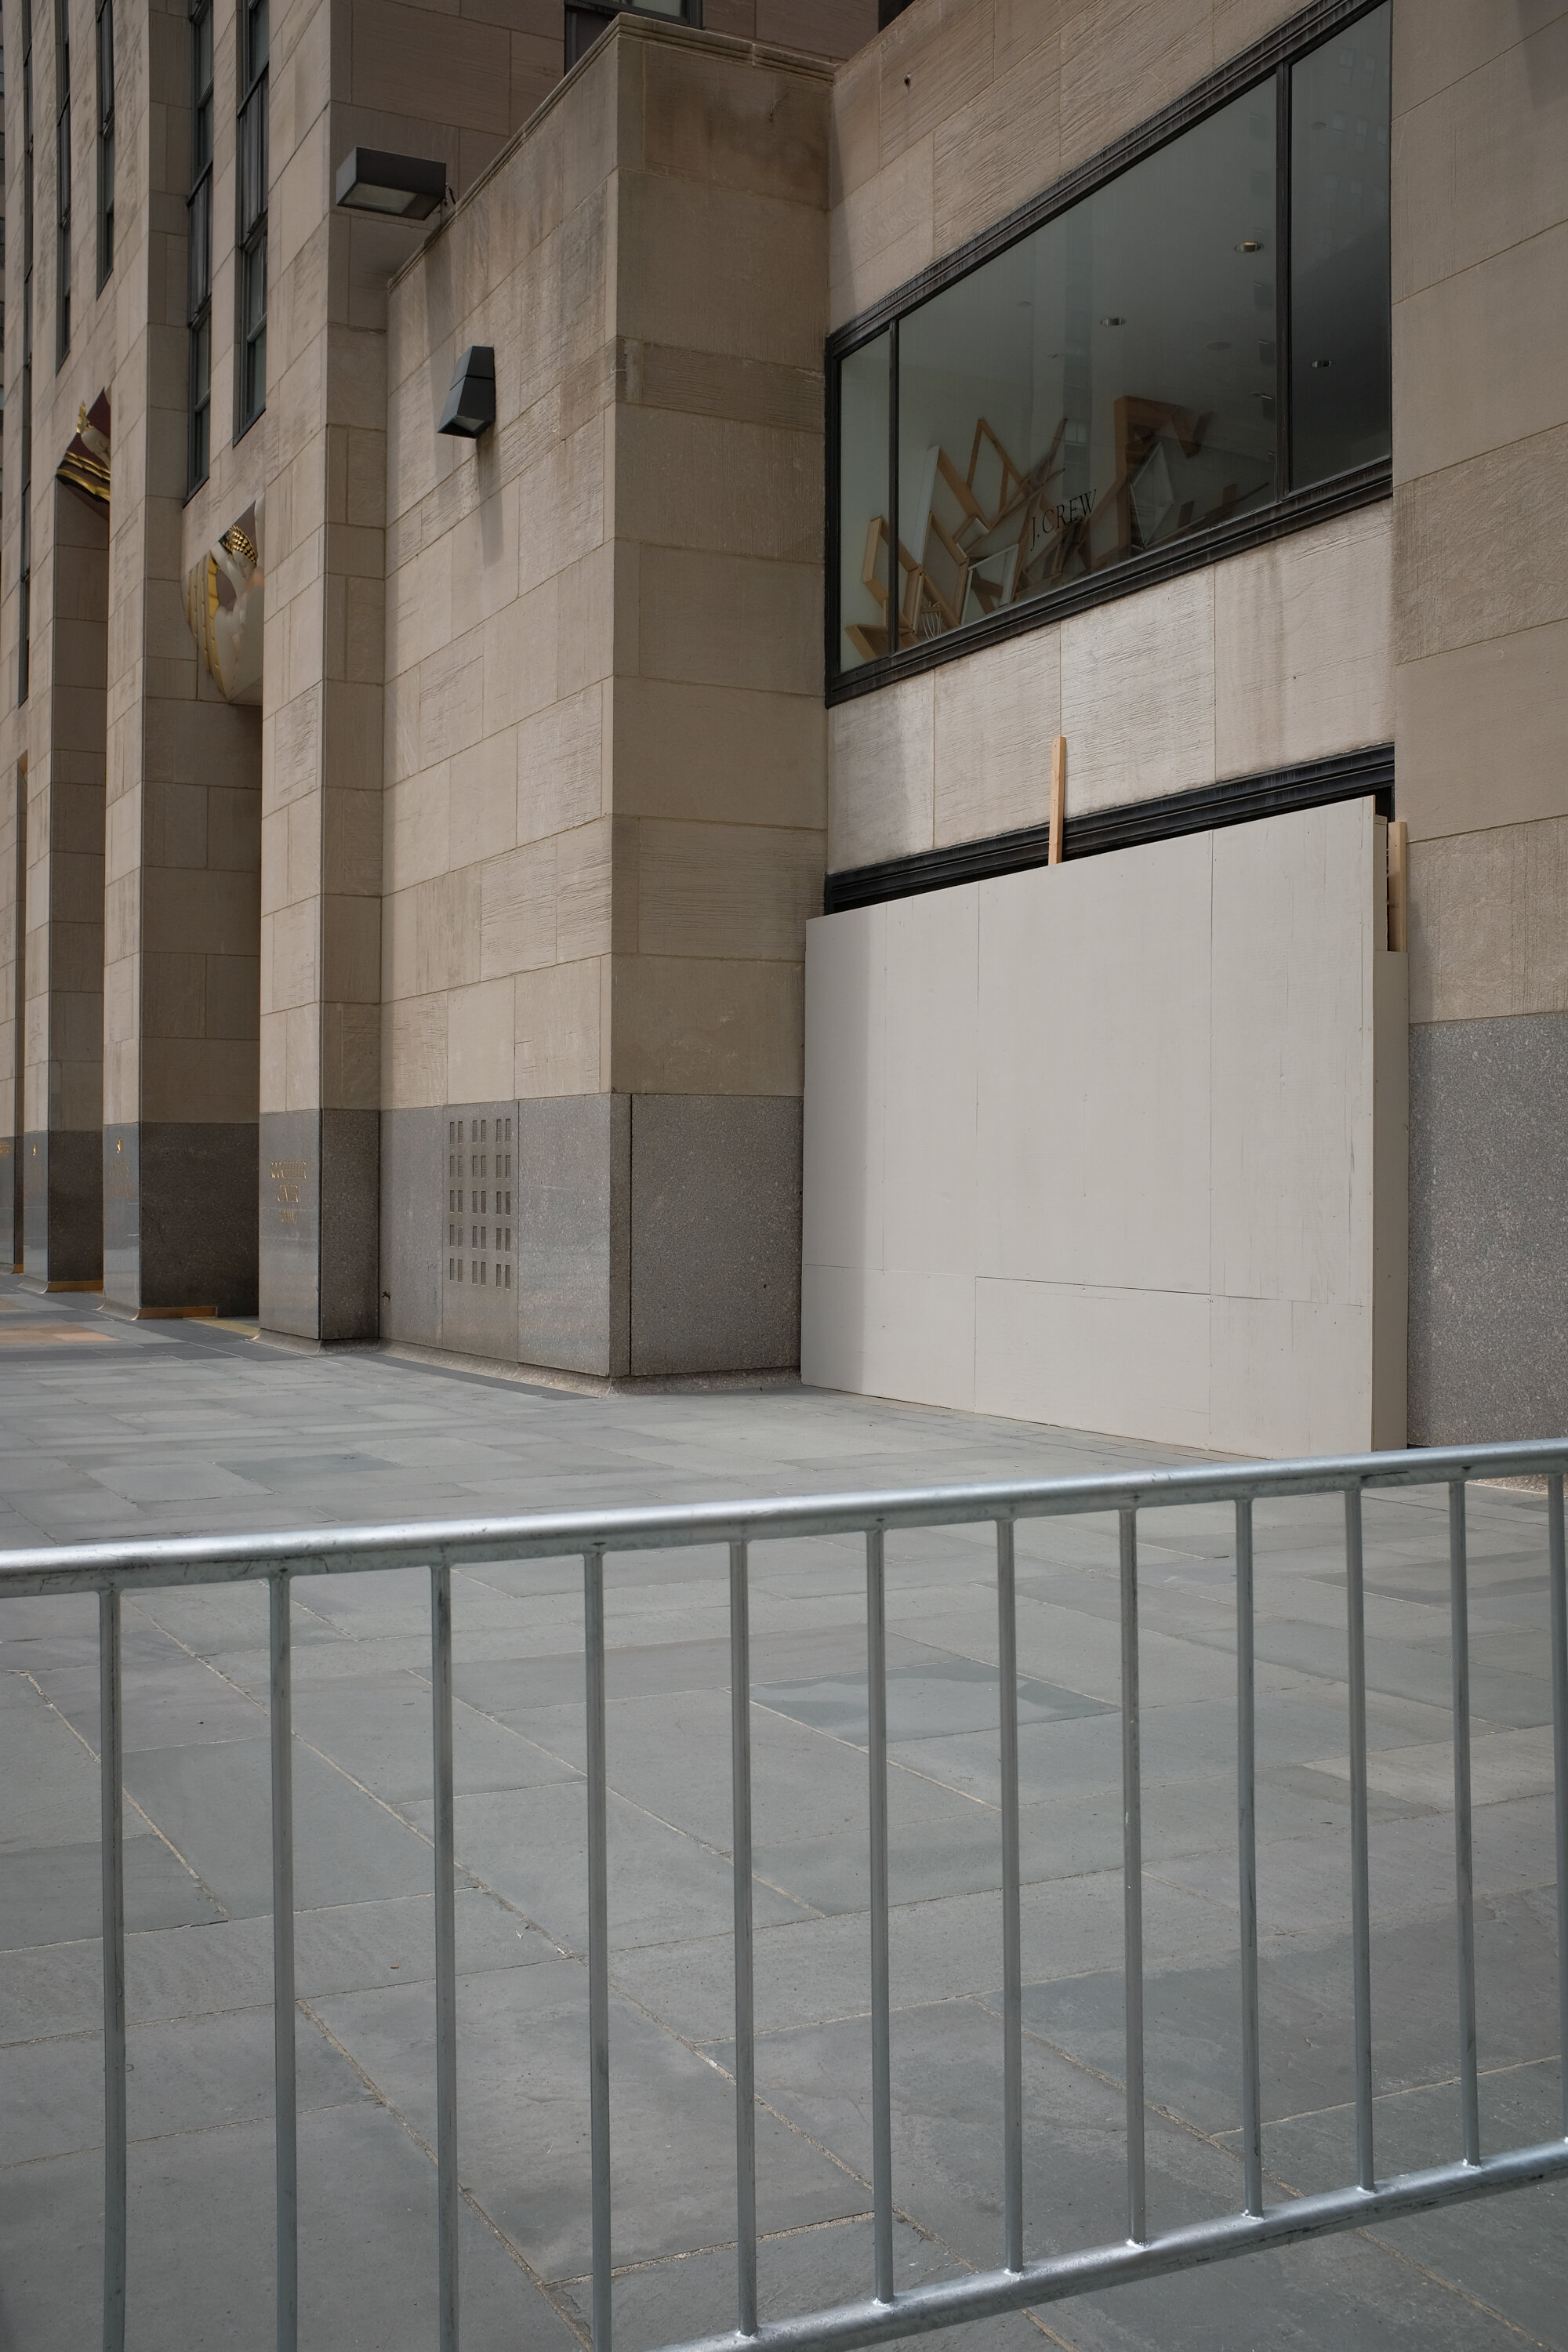  A boarded up 30 Rockefeller Center barred by gates before planned protests in the wake of the death of George Floyd, a Black man killed by police in Minneapolis, on June 4, 2020. 